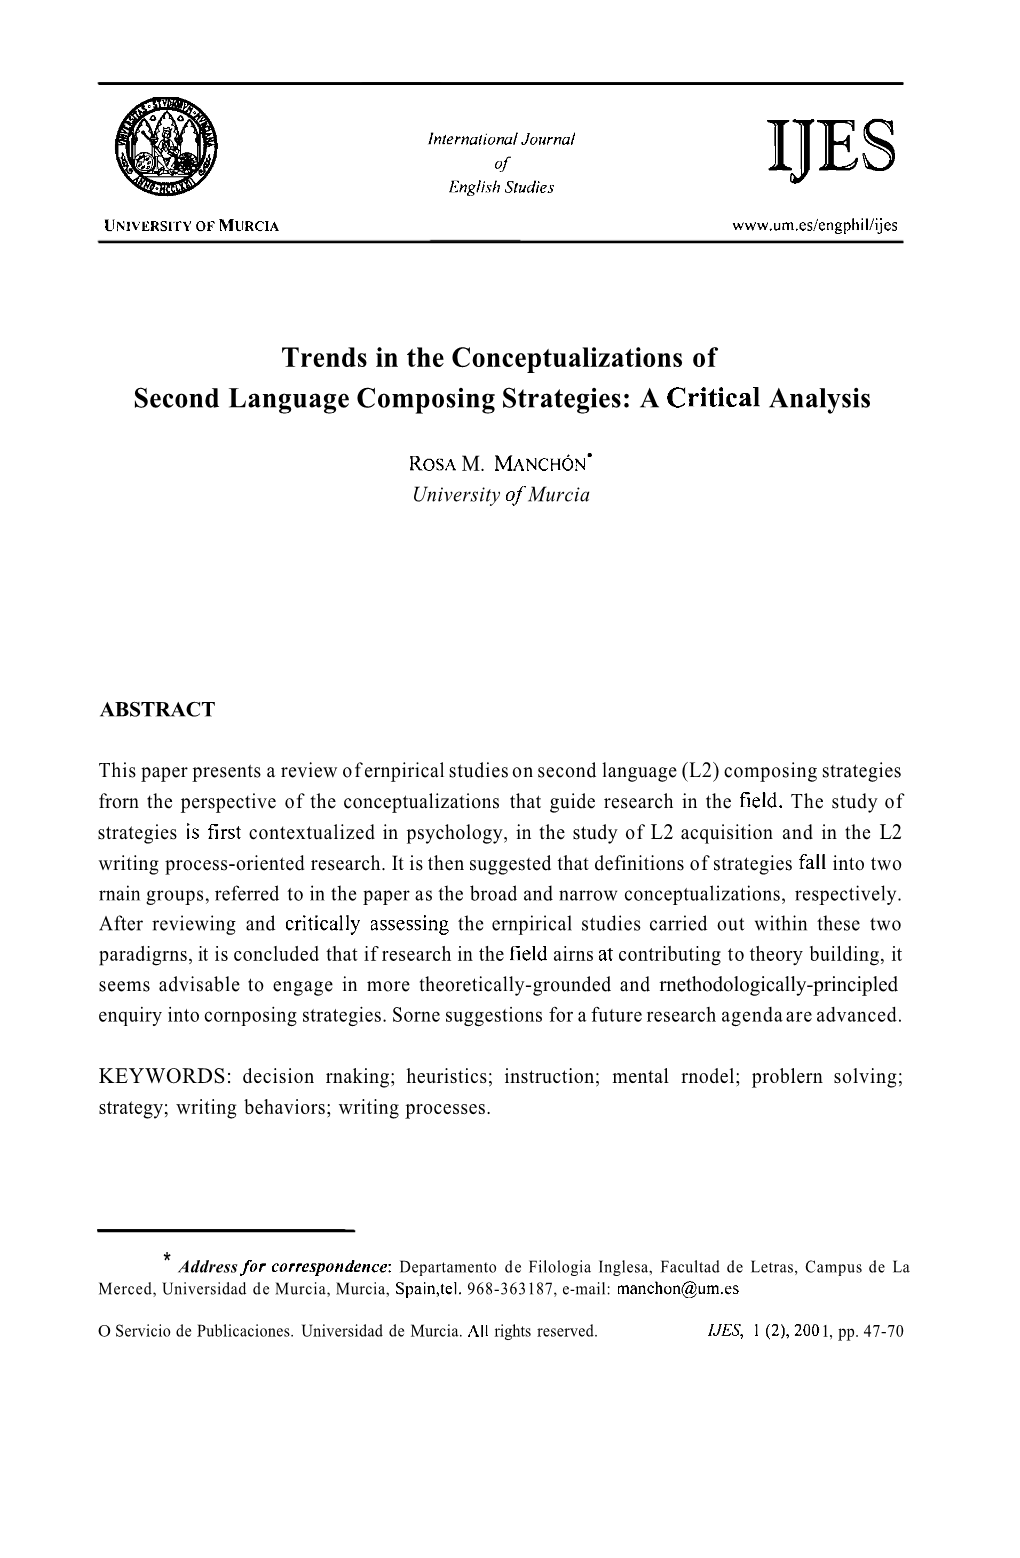 Trends in the Conceptualizations of Second Language Composing Strategies: a Critica1 Analysis